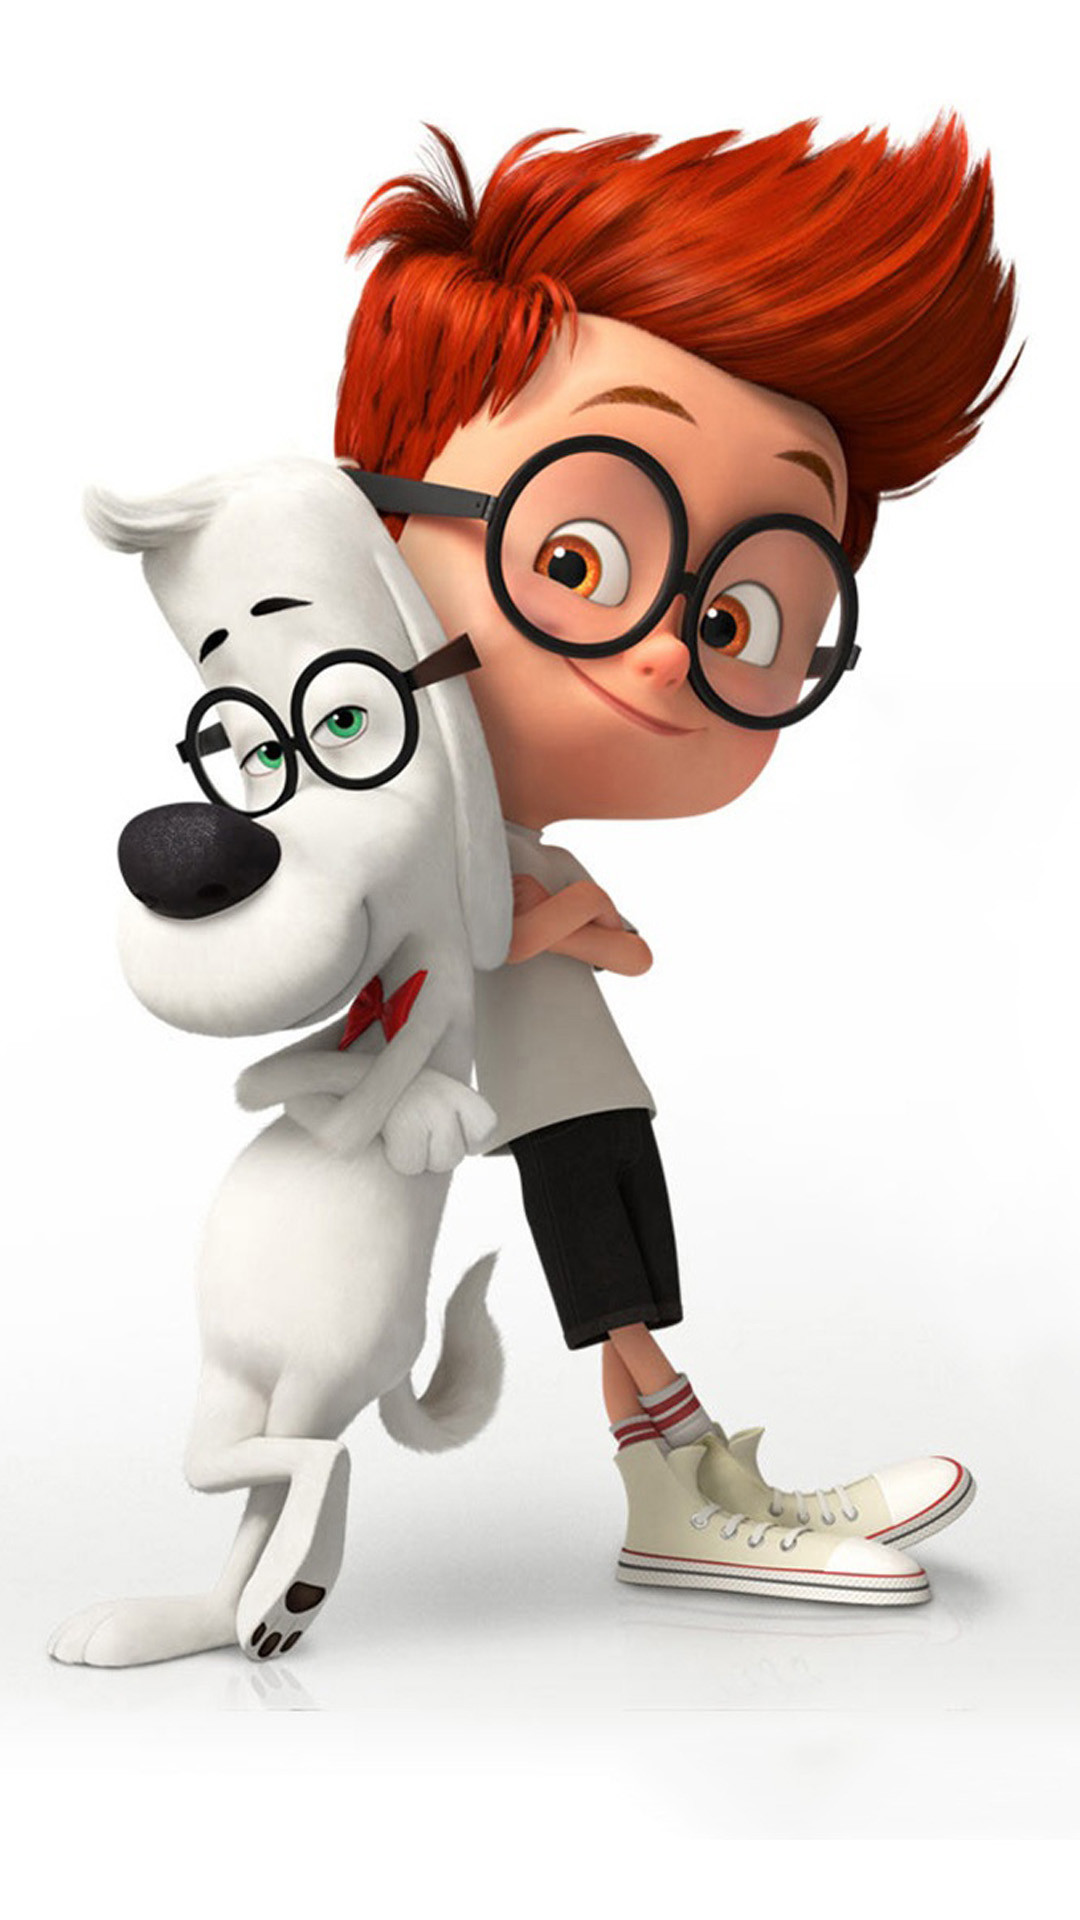 1080x1920 Mr. Peabody And Sherman Poster #iPhone #6 #plus #wallpaper